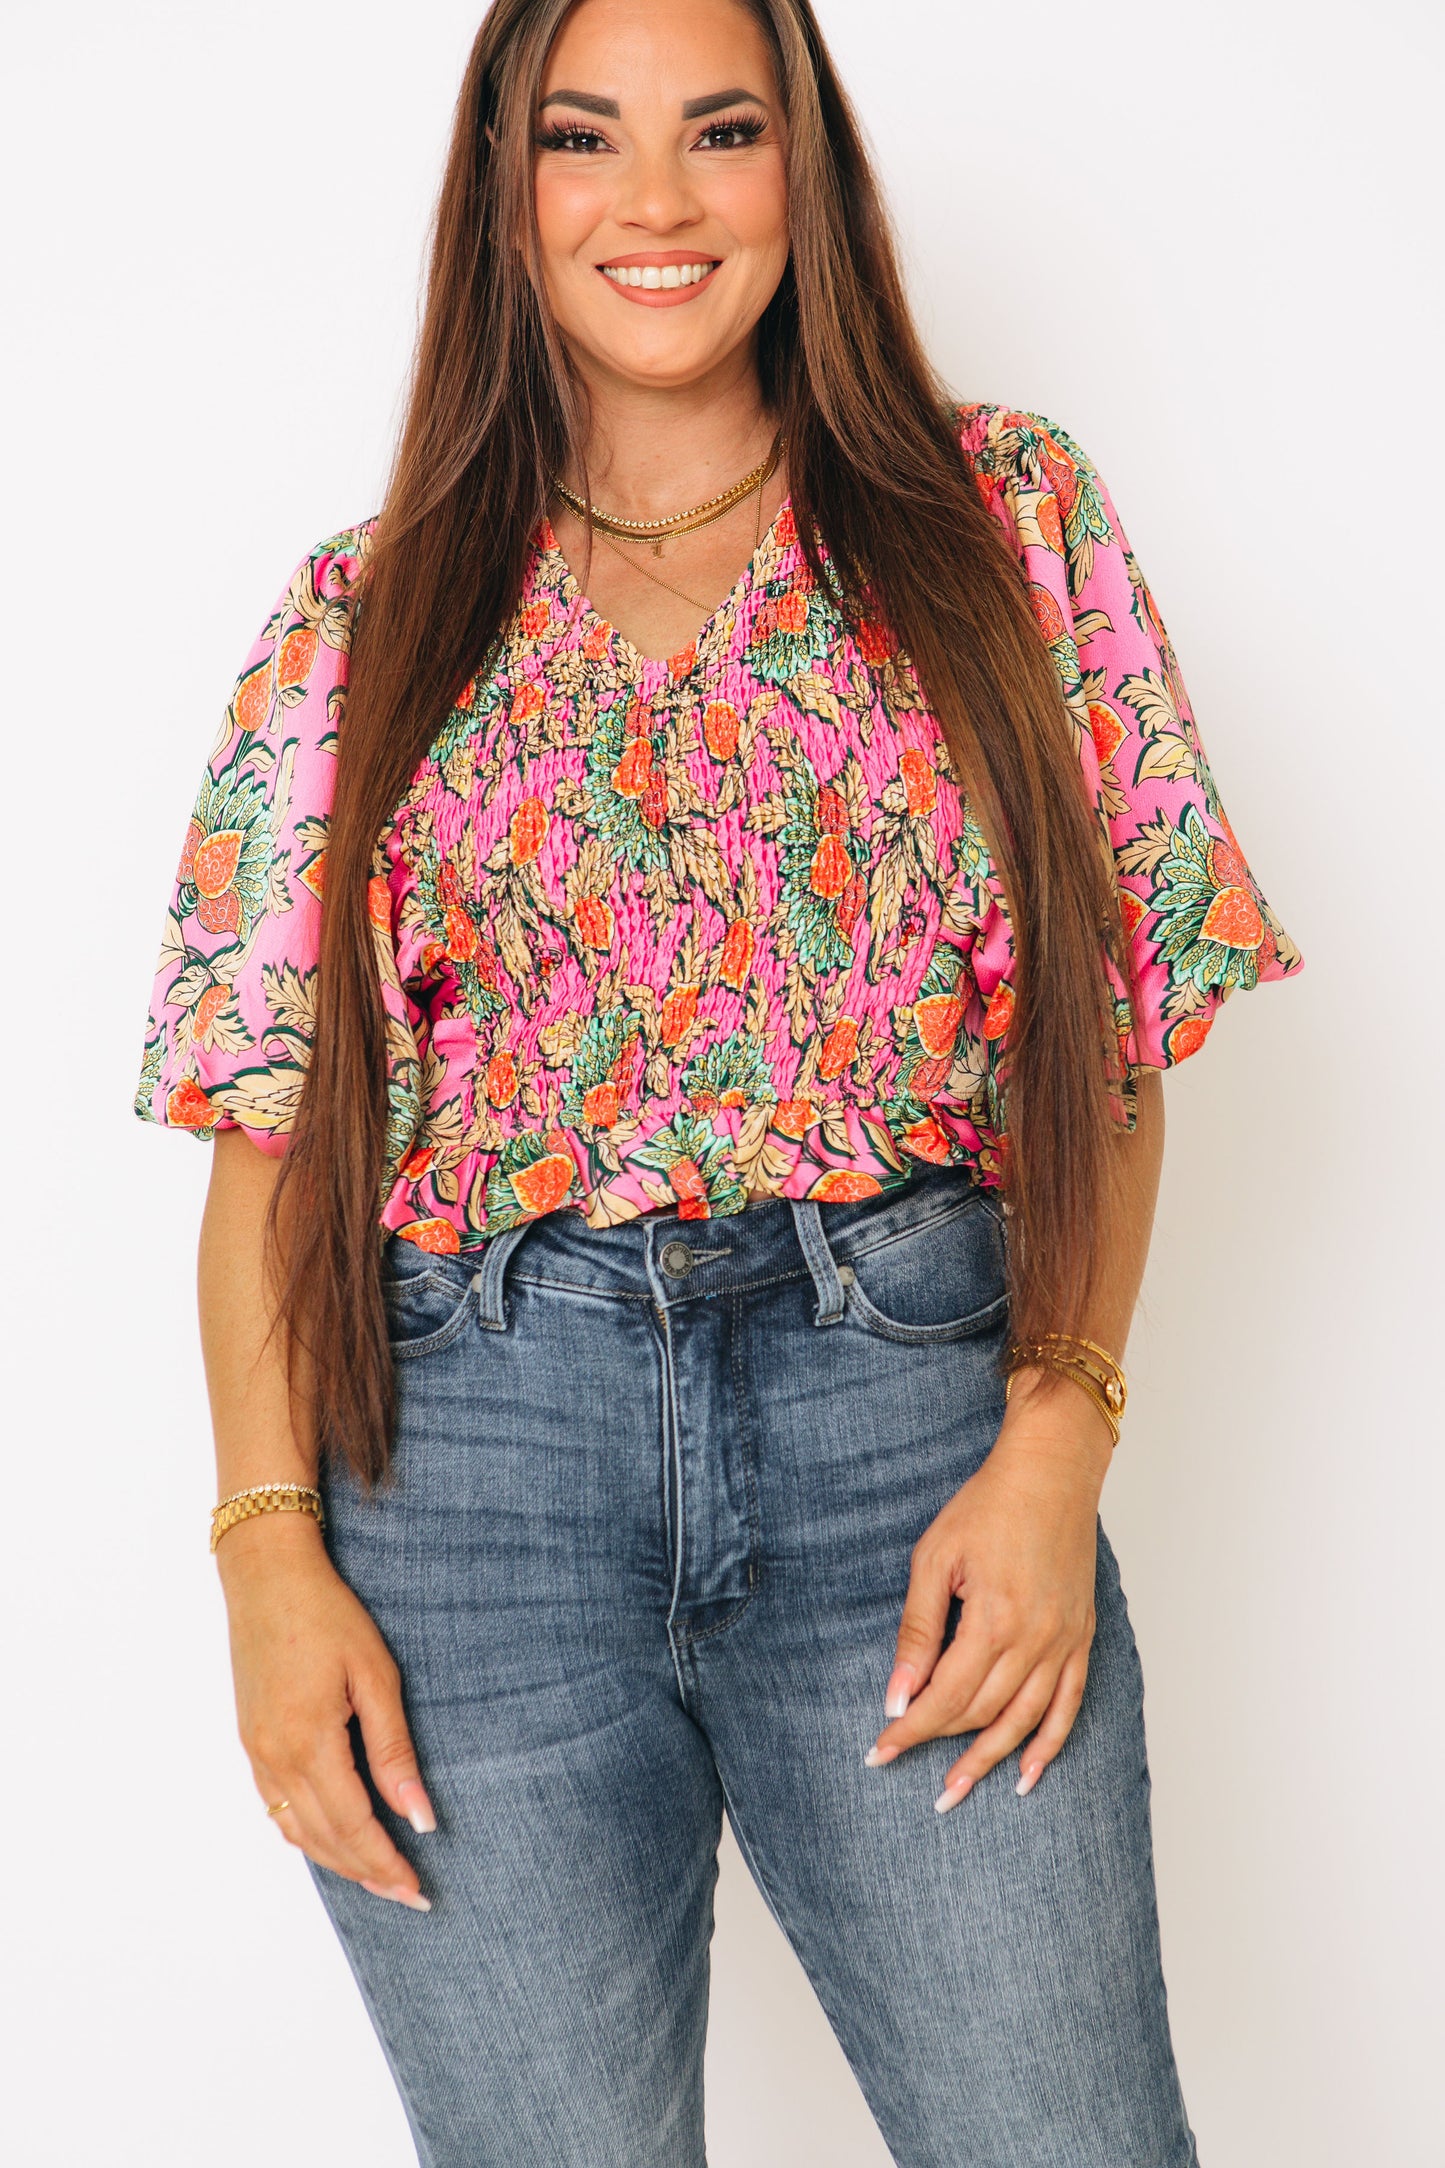 Garden Party Sleeve Smocked Flower Print Top (XS-XL)